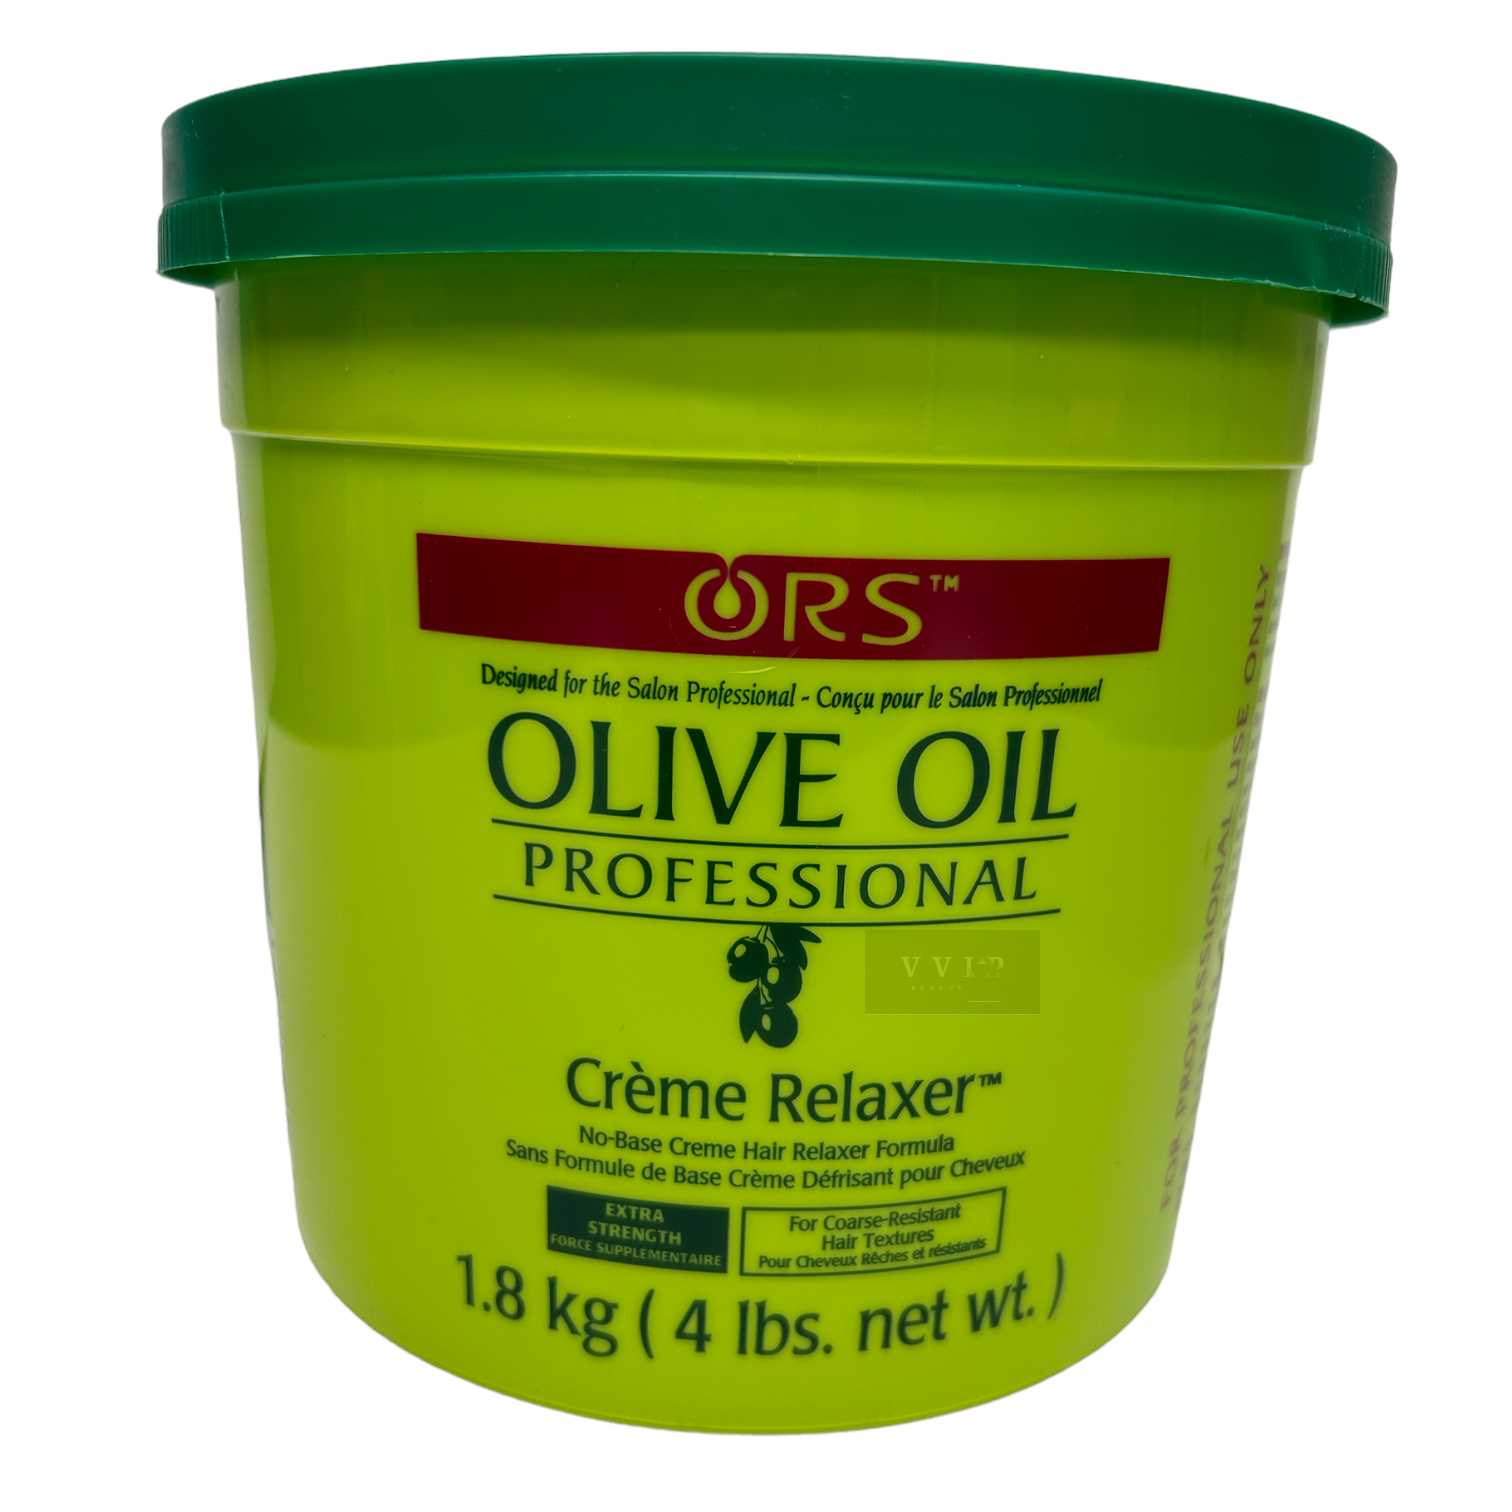 ORS Professional Olive Oil Creme Relaxer - Extra 4 lbs